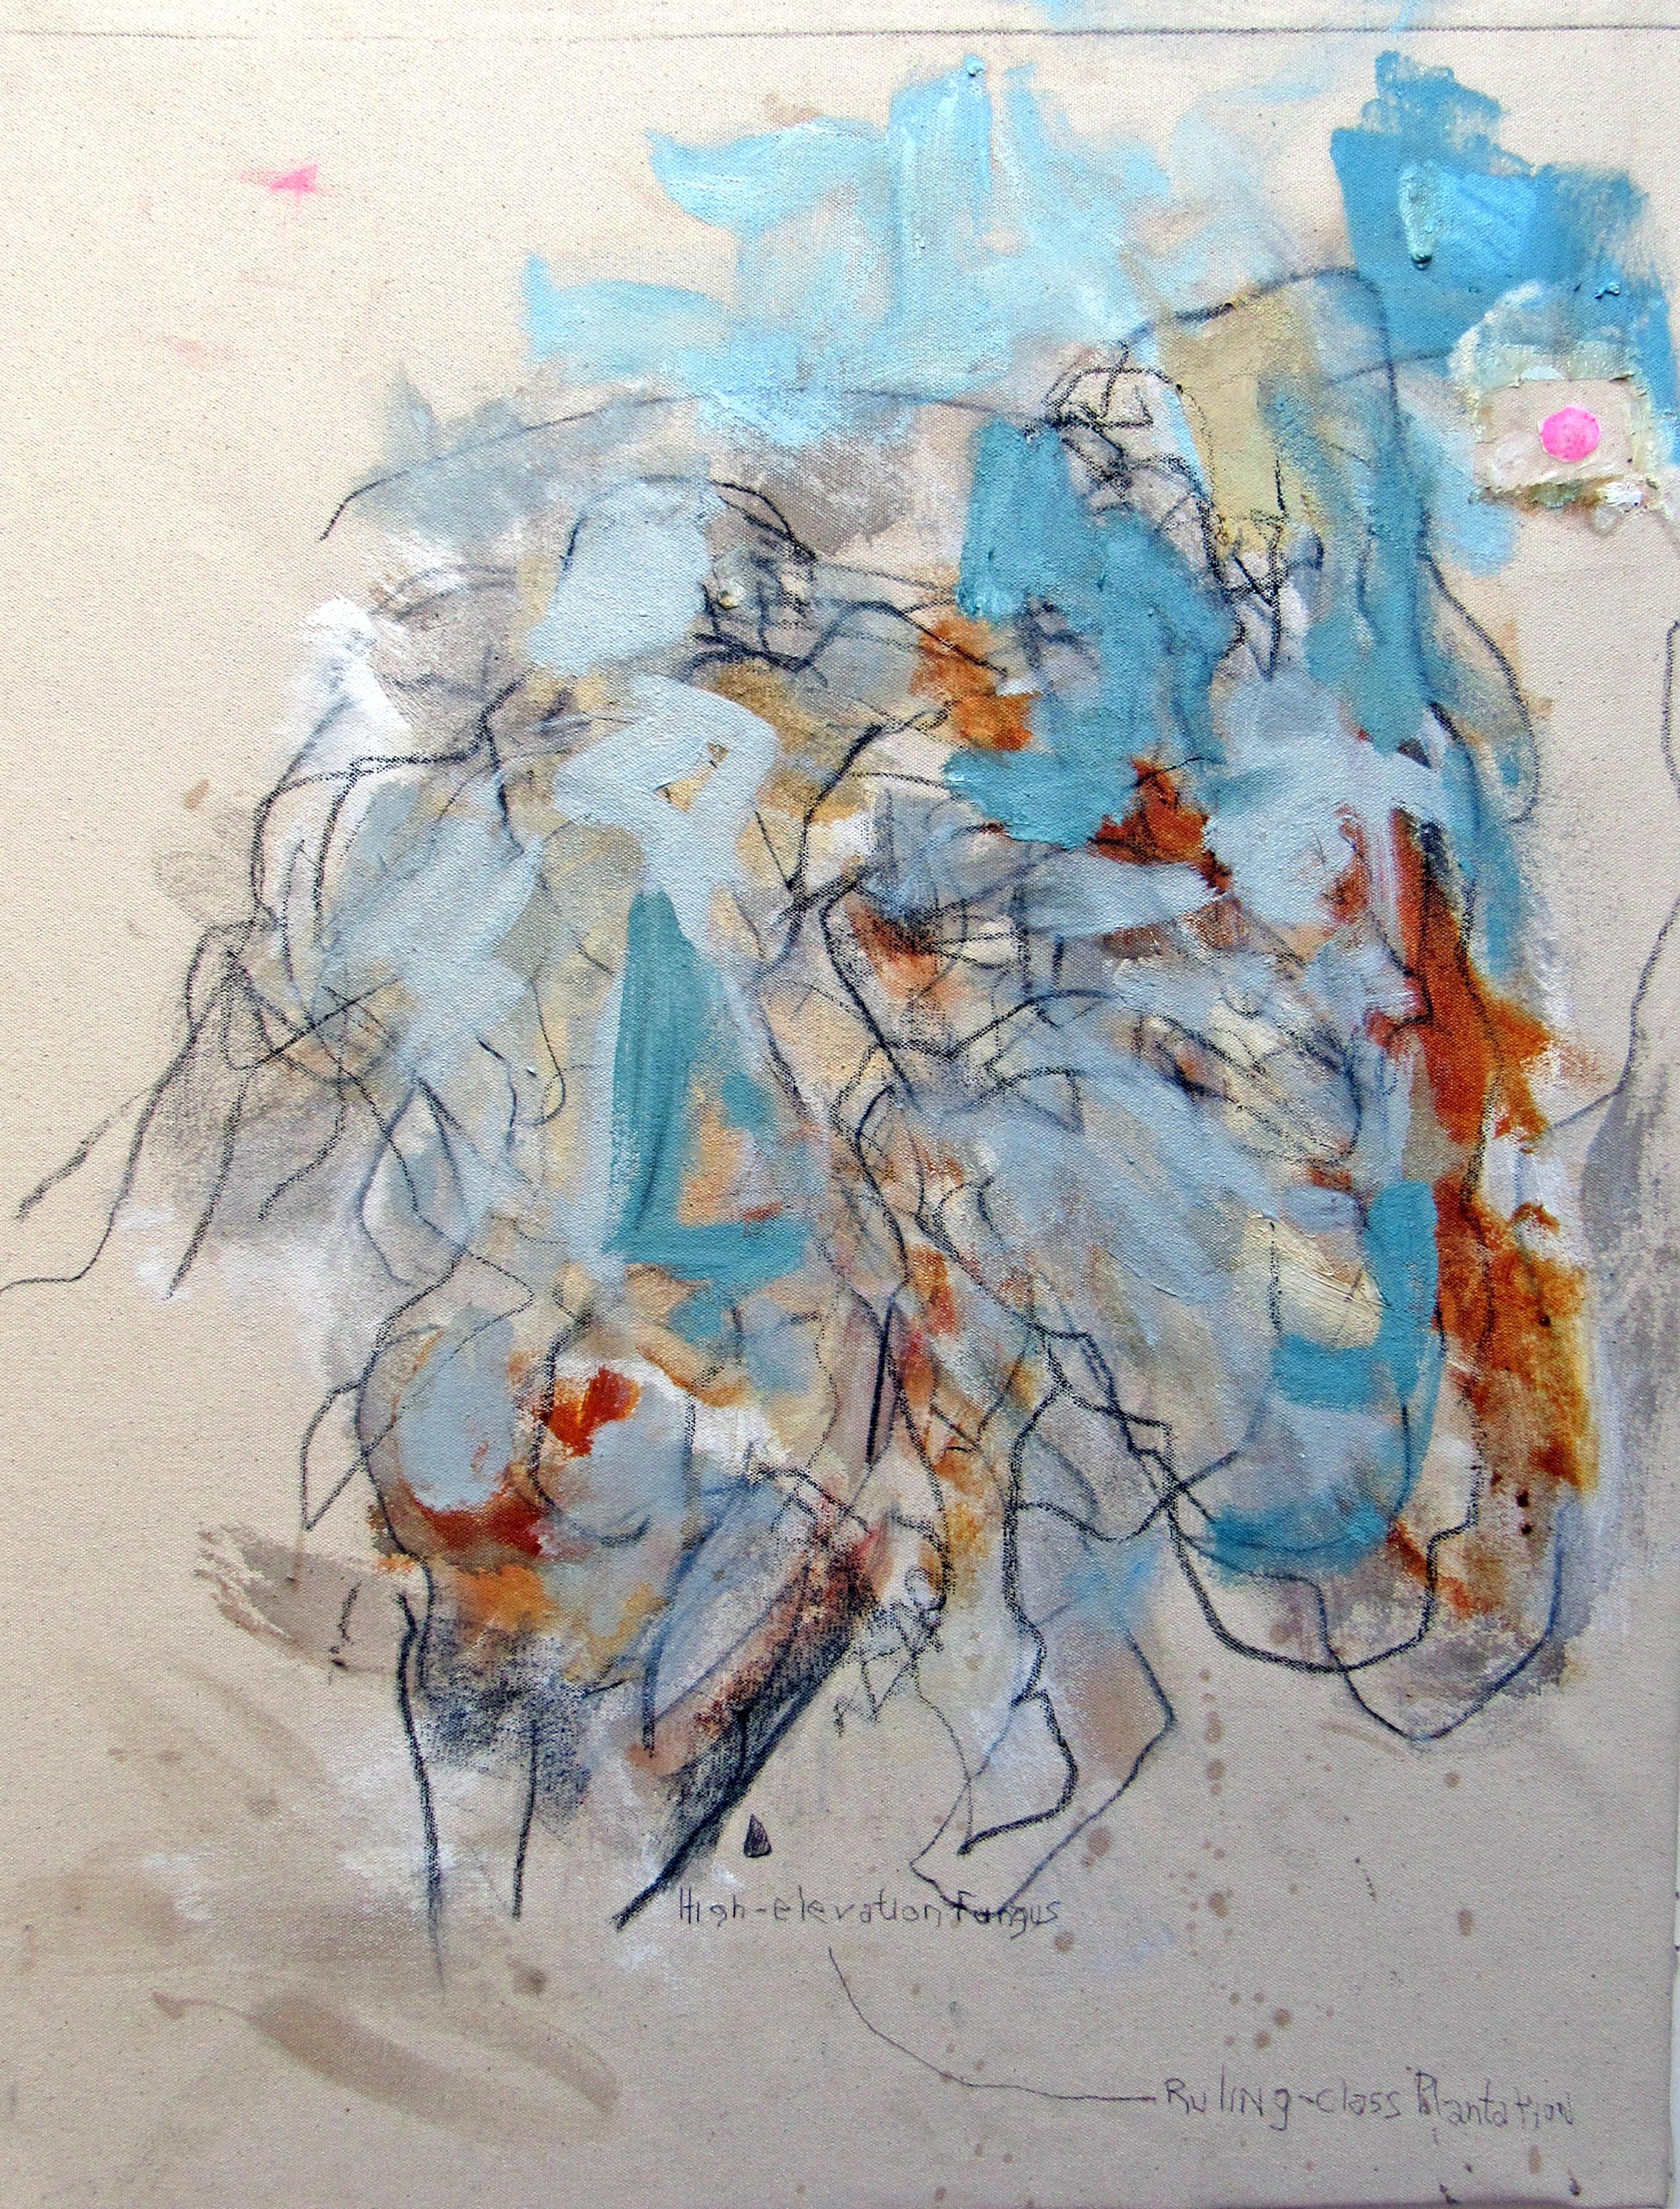 C. Dimitri Figurative Painting - High-Elevation Fungus, mixed media gestural abstraction blue & neutral tones